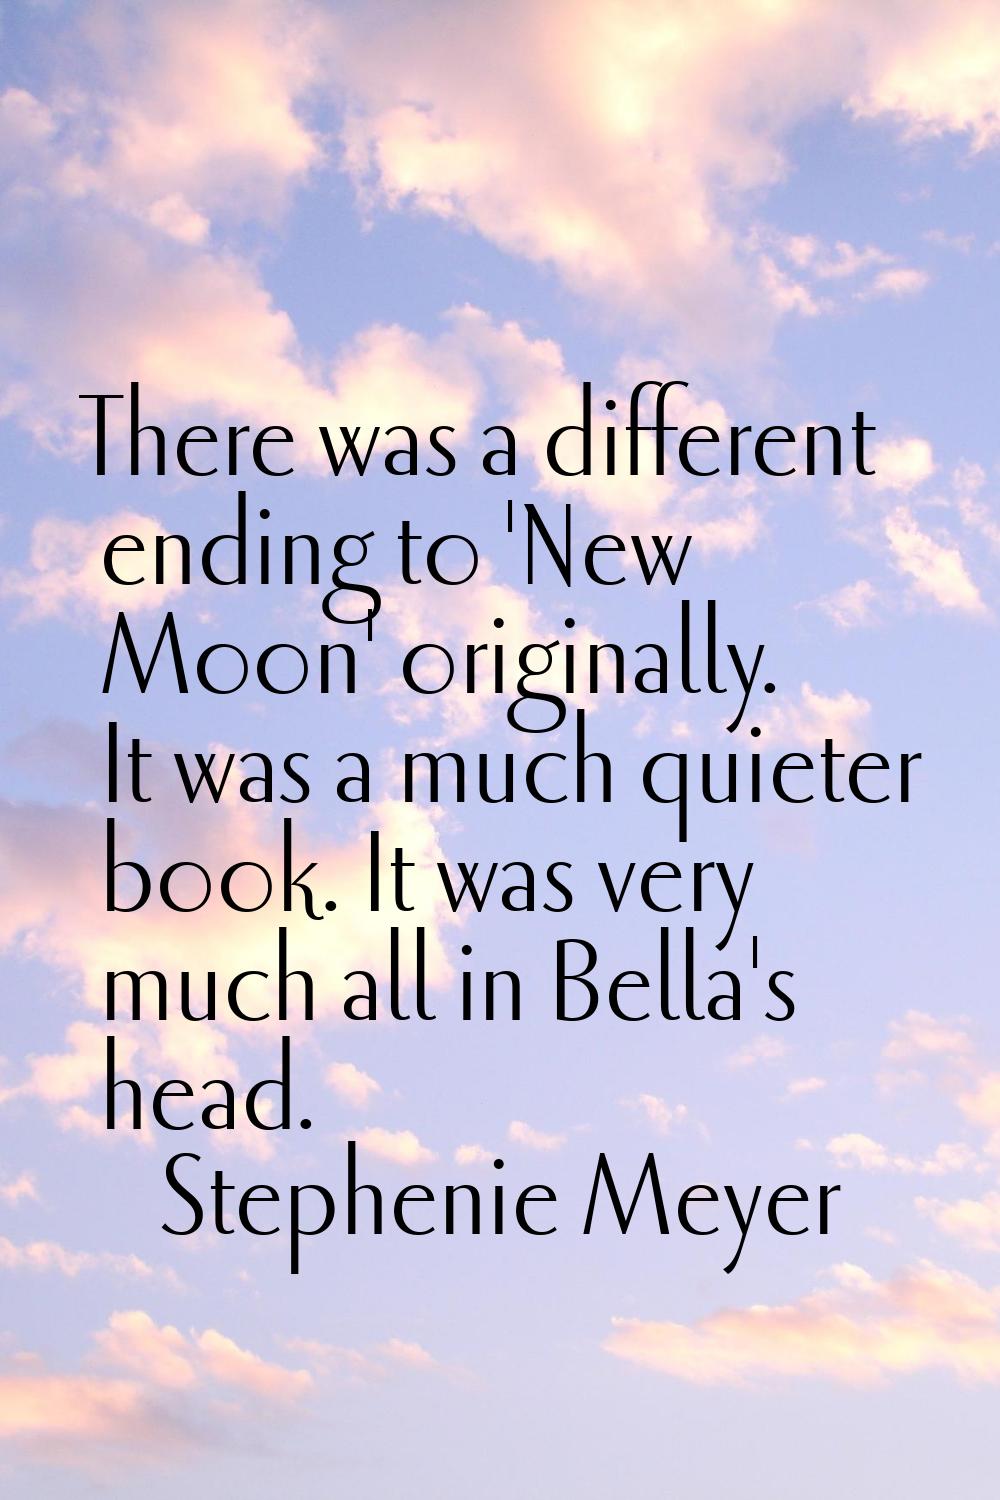 There was a different ending to 'New Moon' originally. It was a much quieter book. It was very much